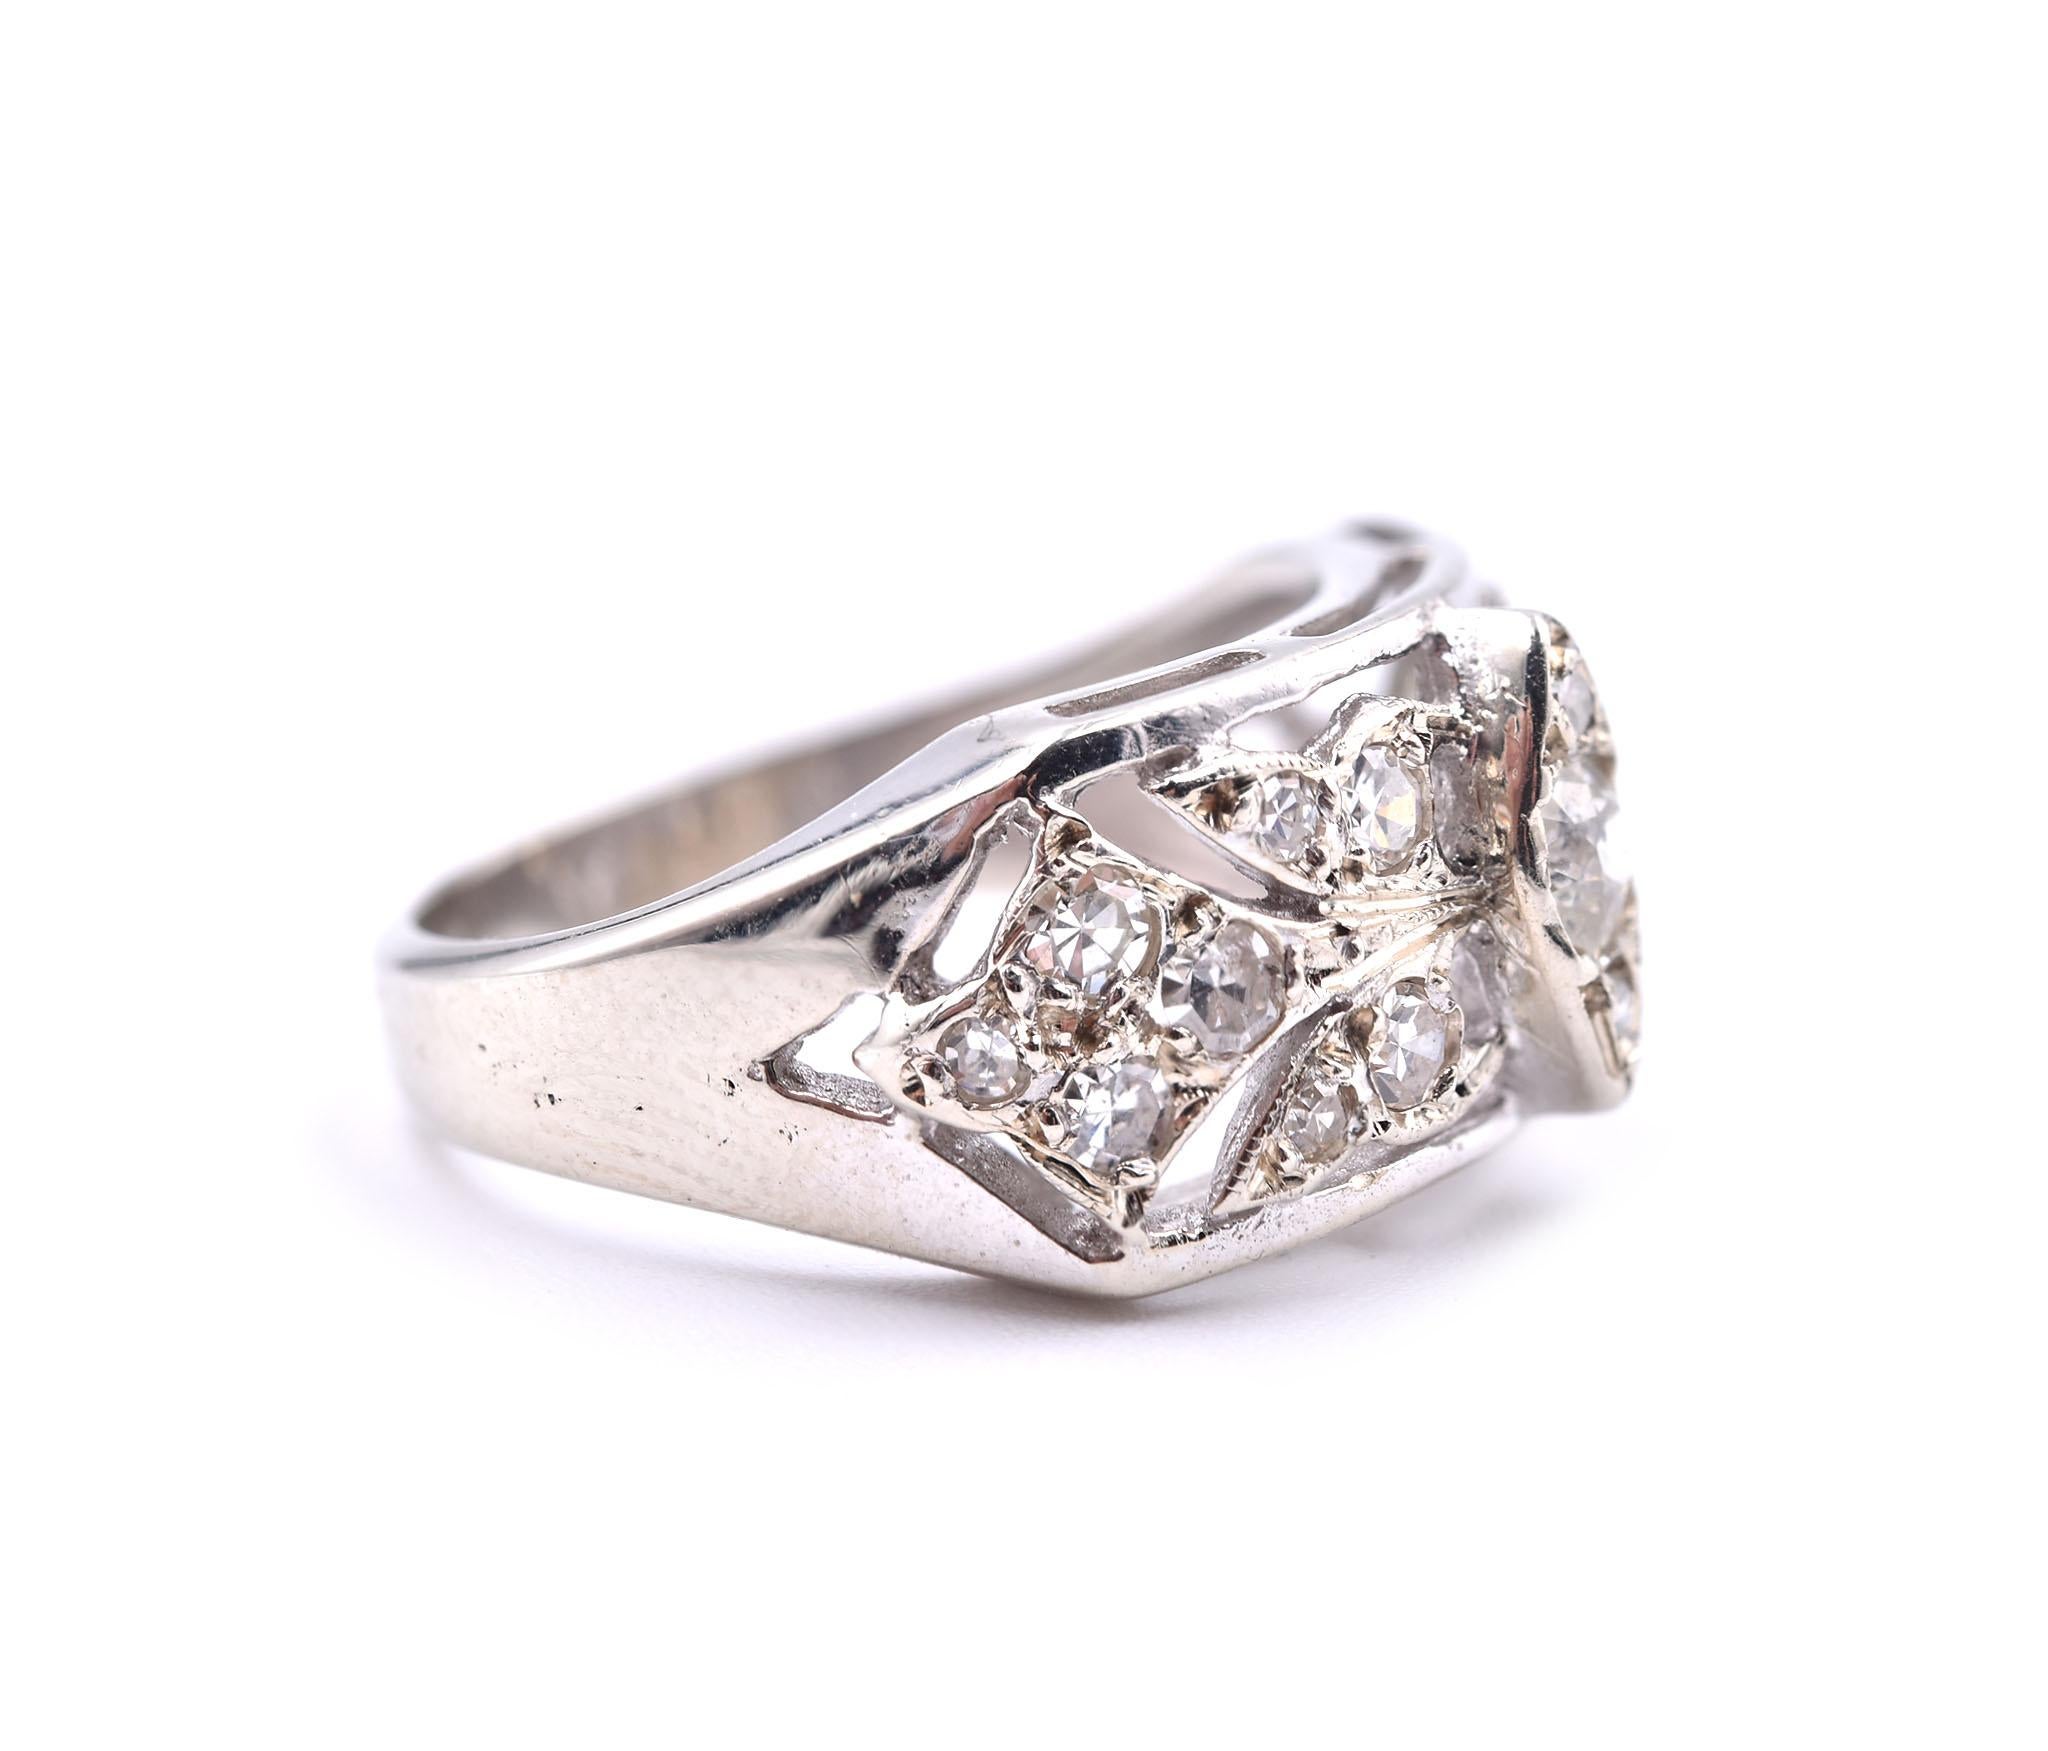 Designer: custom design
Material: 14k white gold
Diamonds: 17 round brilliant cut= .65cttw
Color: H-I
Clarity: SI-2-I1
Size: 5 ½ (please allow two additional shipping days for sizing requests)
Dimensions: ring top is 9.43mm by 19.81mm
Weight: 4.19